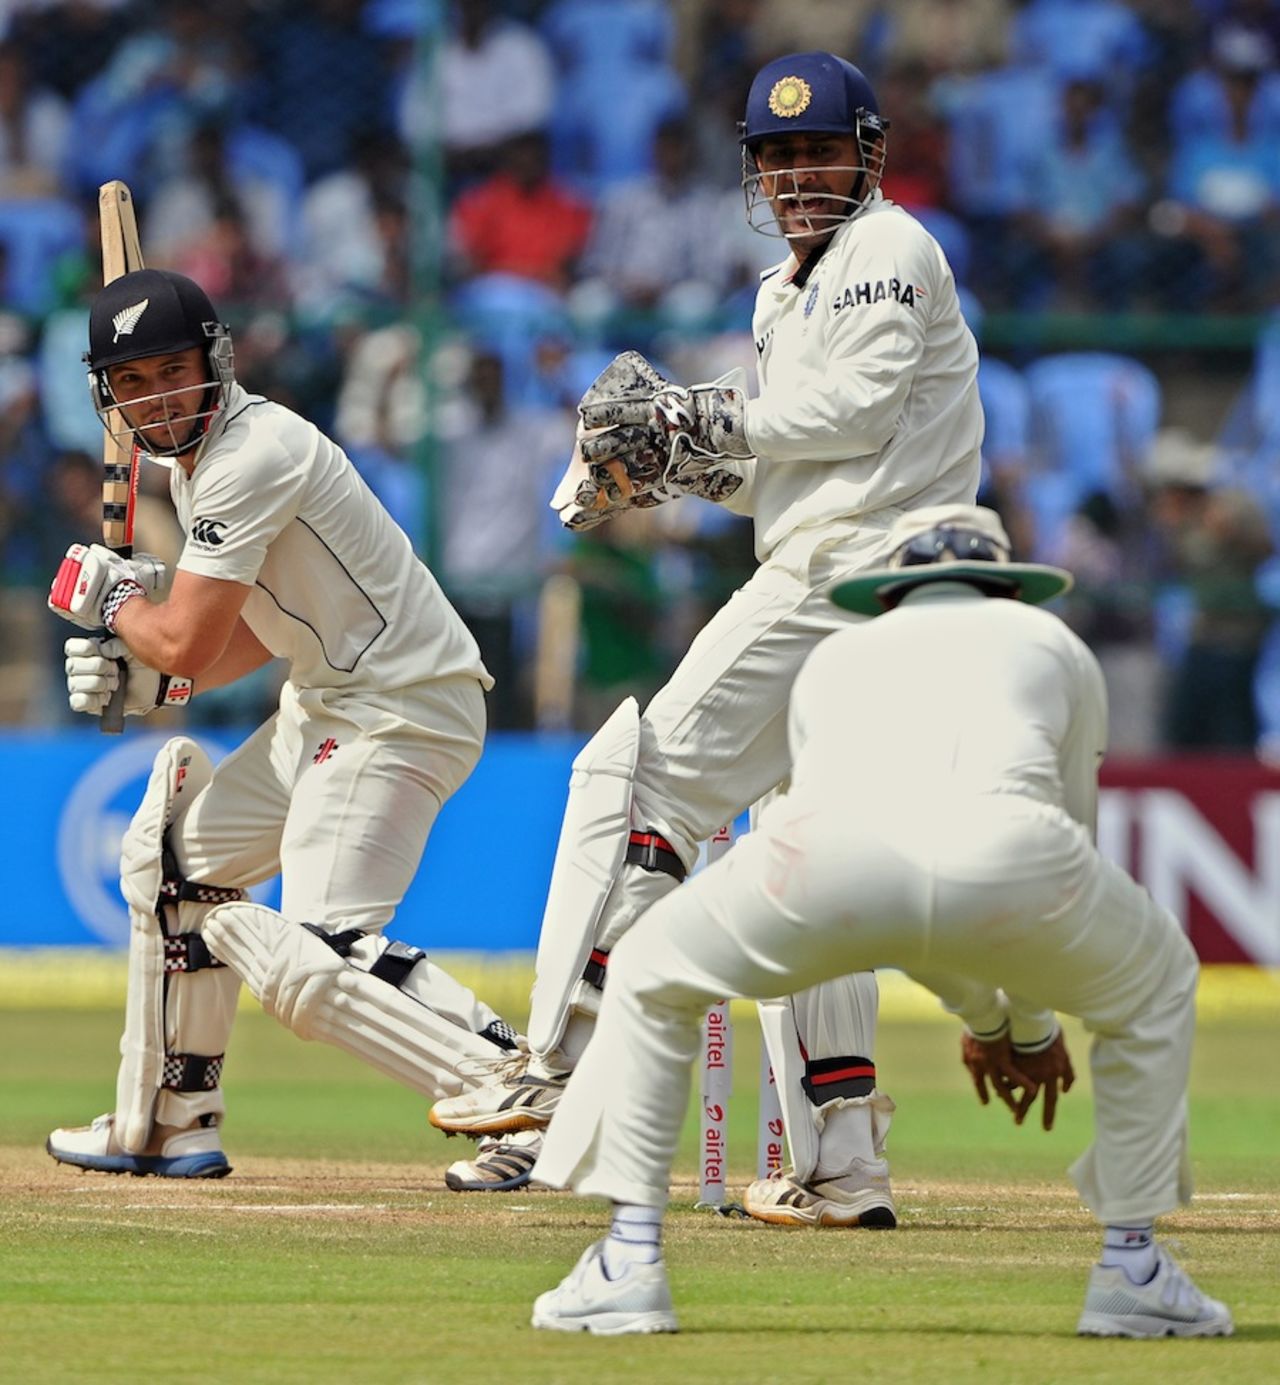 Daniel Flynn edges the ball into the hands of Virender Sehwag at slip, India v New Zealand, 2nd Test, Bangalore, 3rd day, September 2, 2012